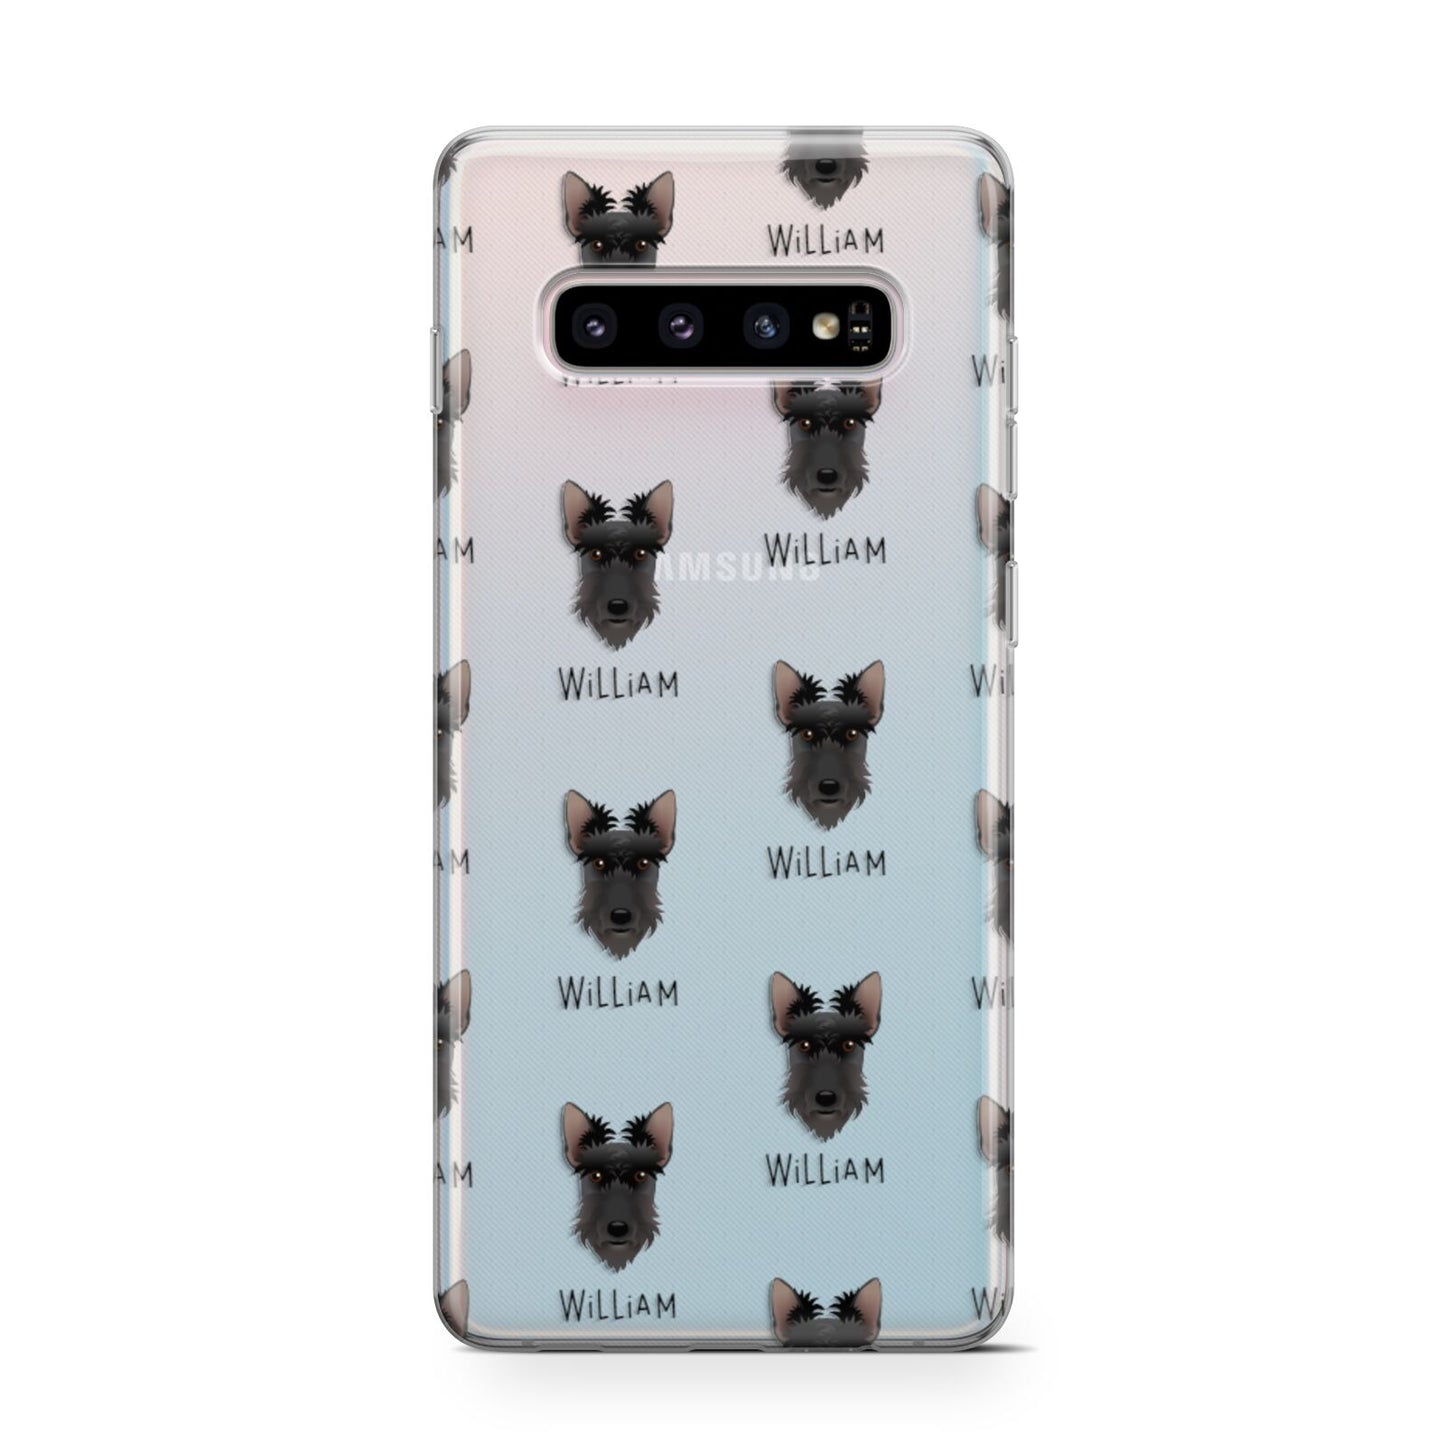 Scottish Terrier Icon with Name Samsung Galaxy S10 Case